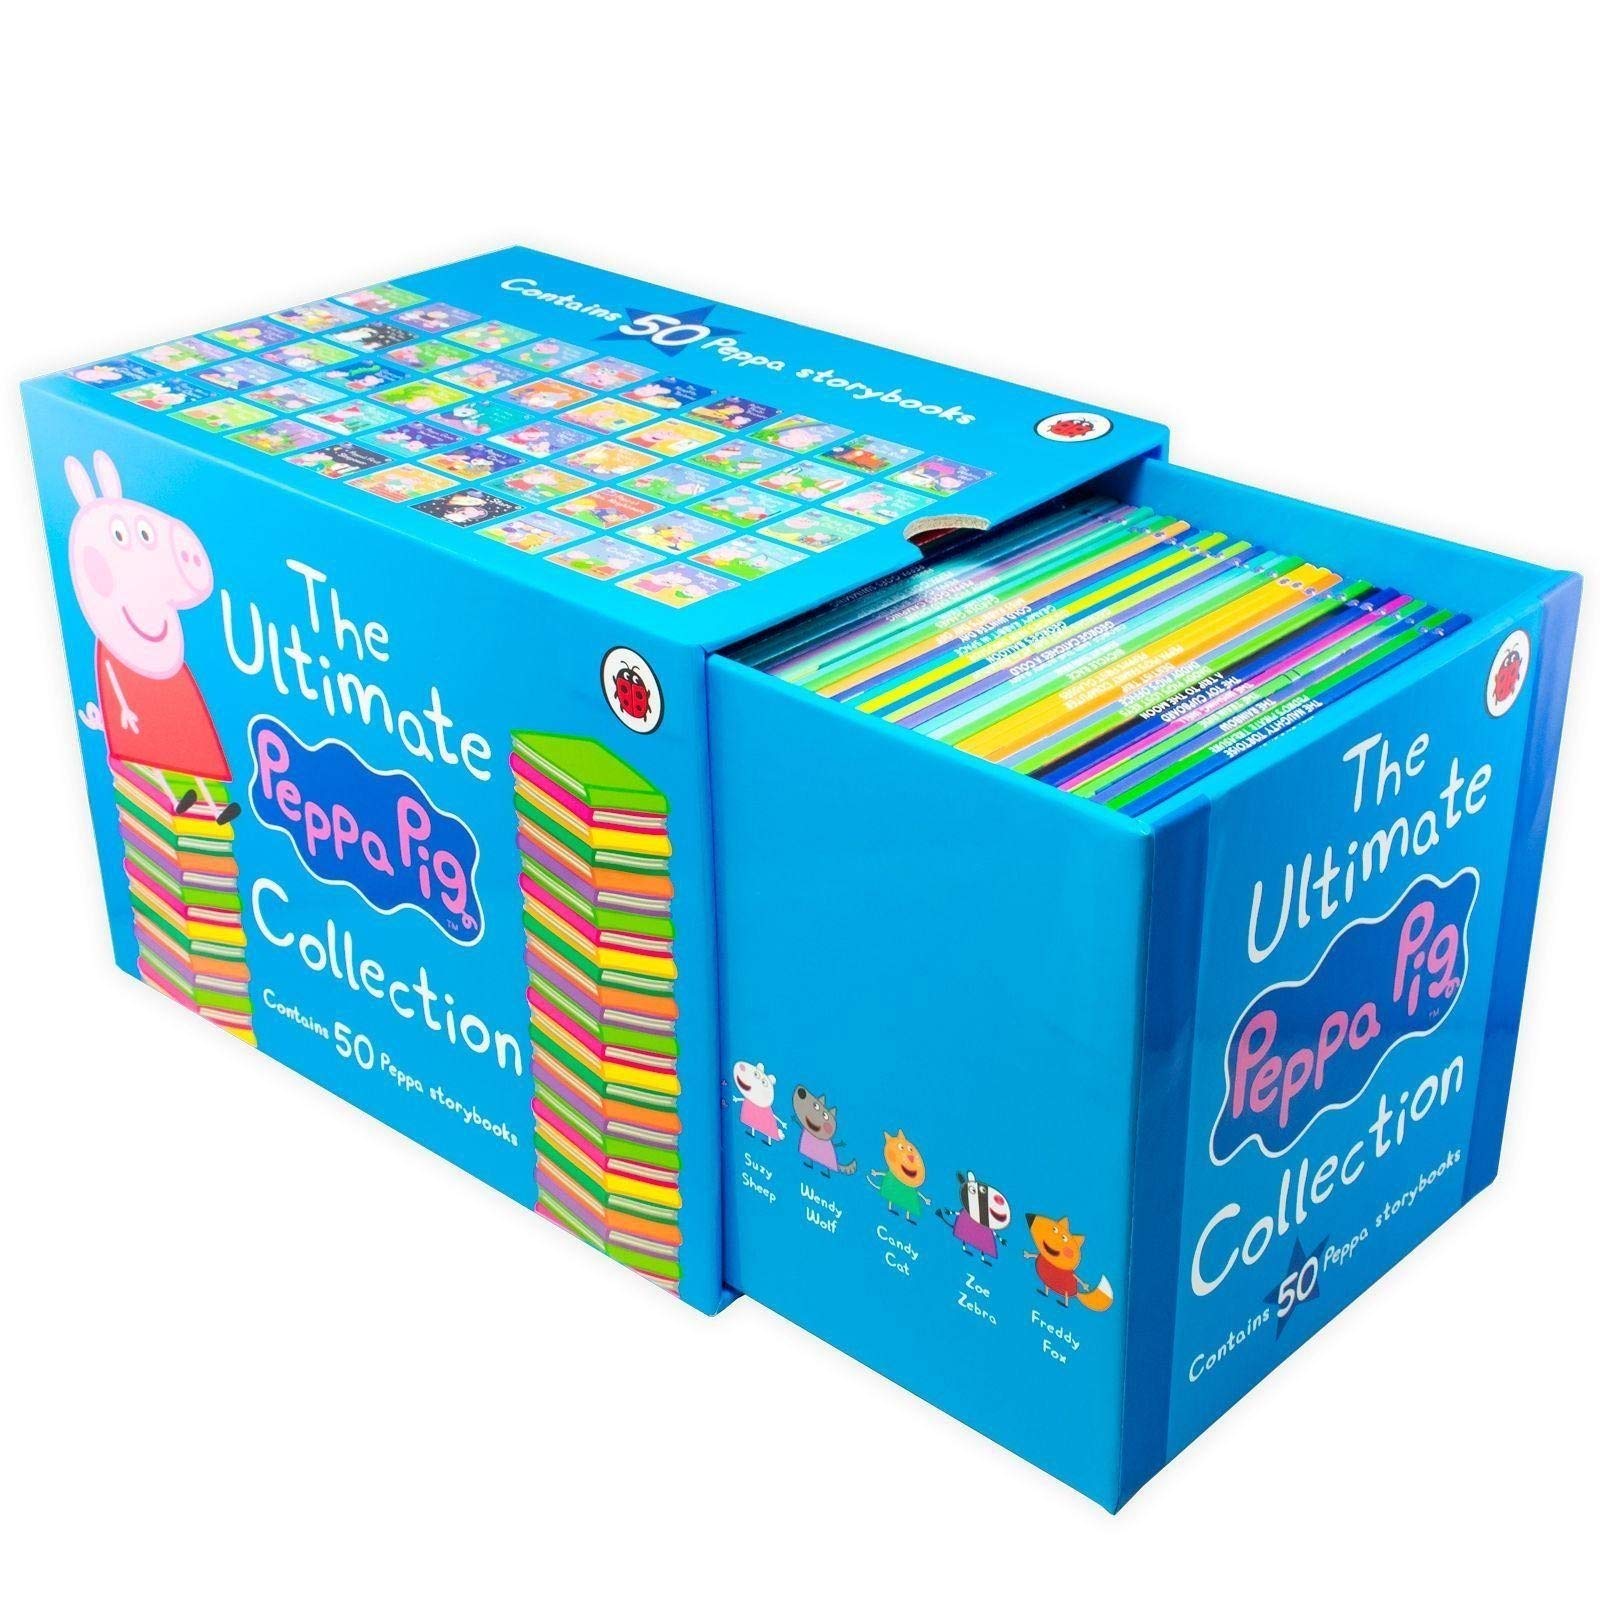 The Ultimate Peppa Pig Collection 50 Books Box Set Peppa's Classic Storybook - Lets Buy Books